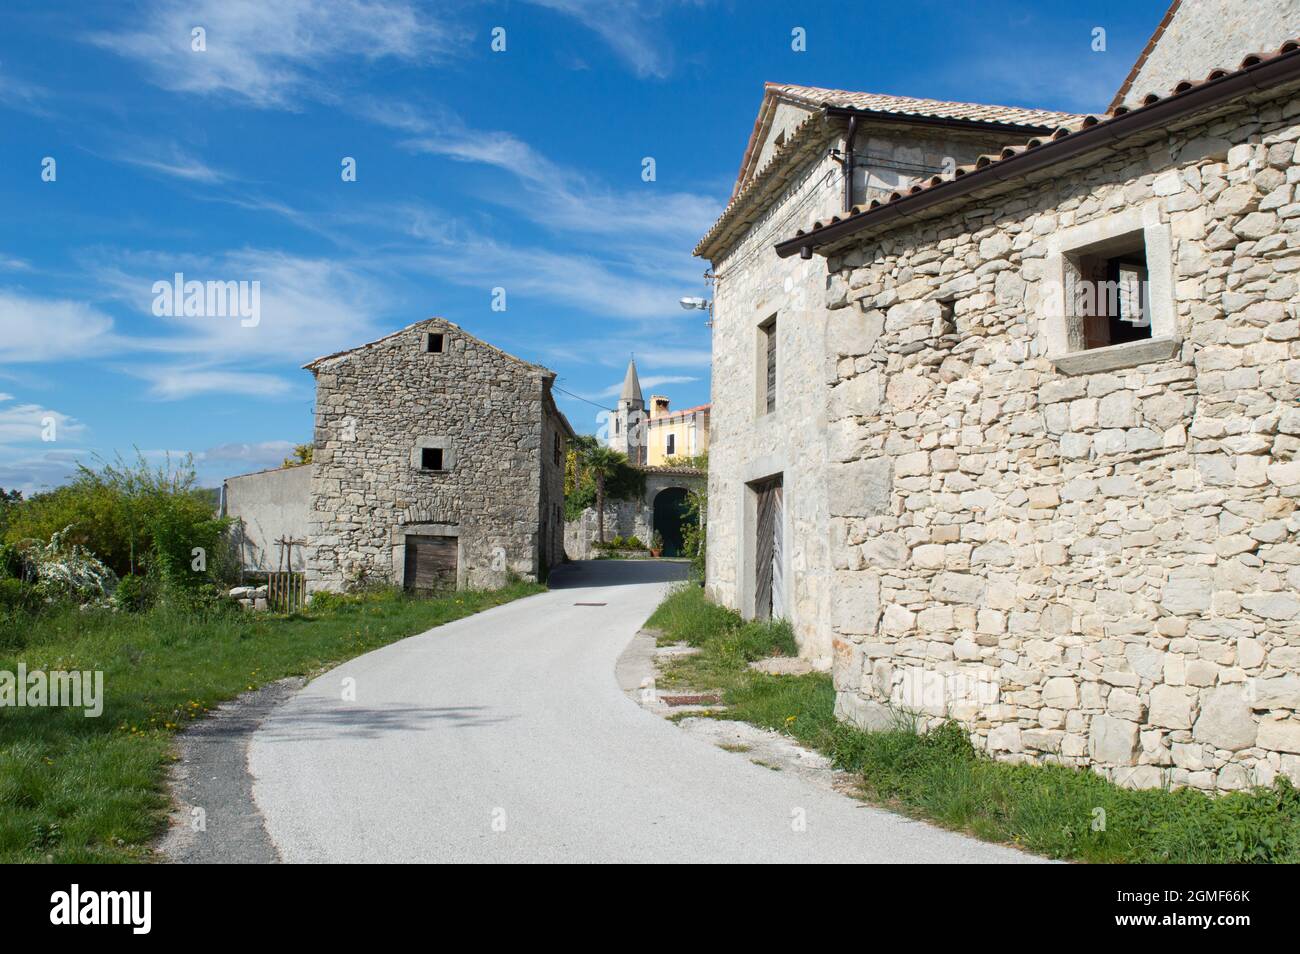 Small ancient town Boljun in northeast Istria, Croatia with characteristic stone houses and a bell tower Stock Photo